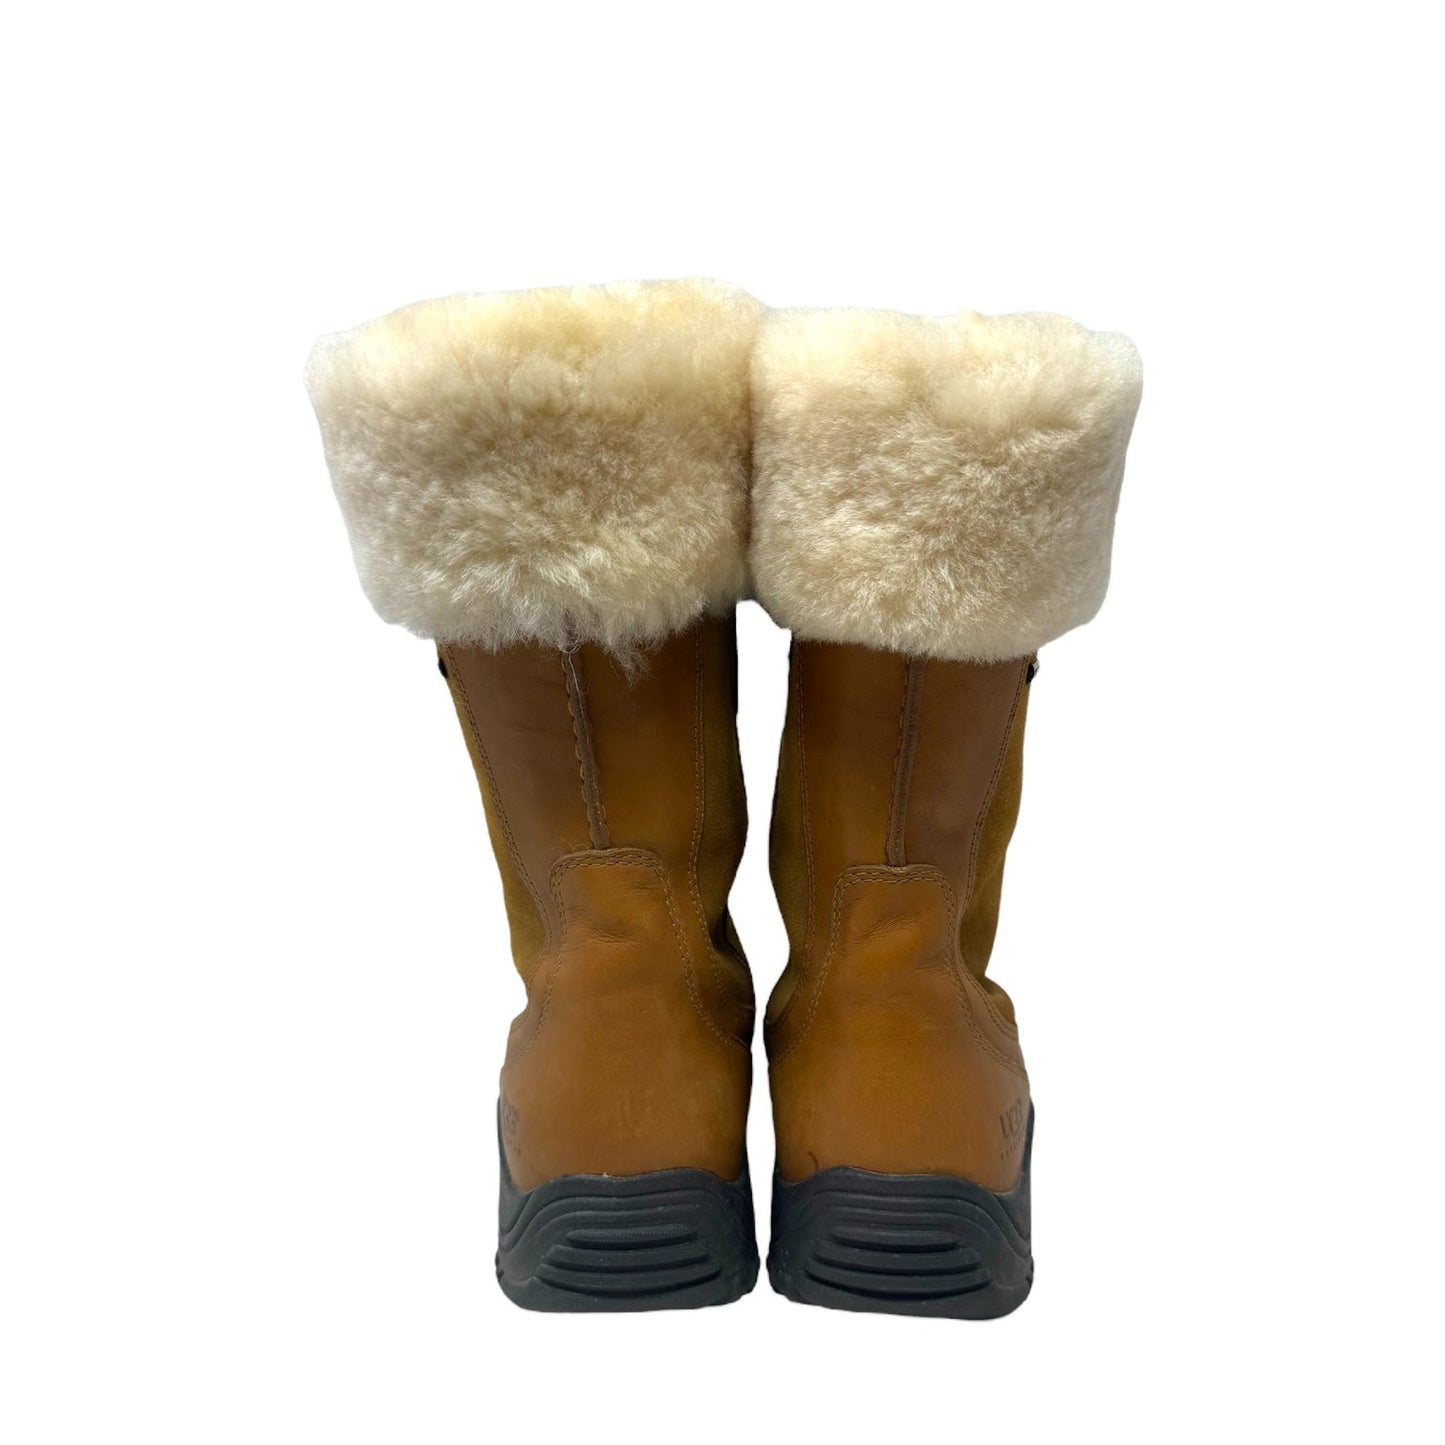 Bandon Vibram Gore Tex Leather Boots-Marsh Chestnut By Ugg  Size: 8